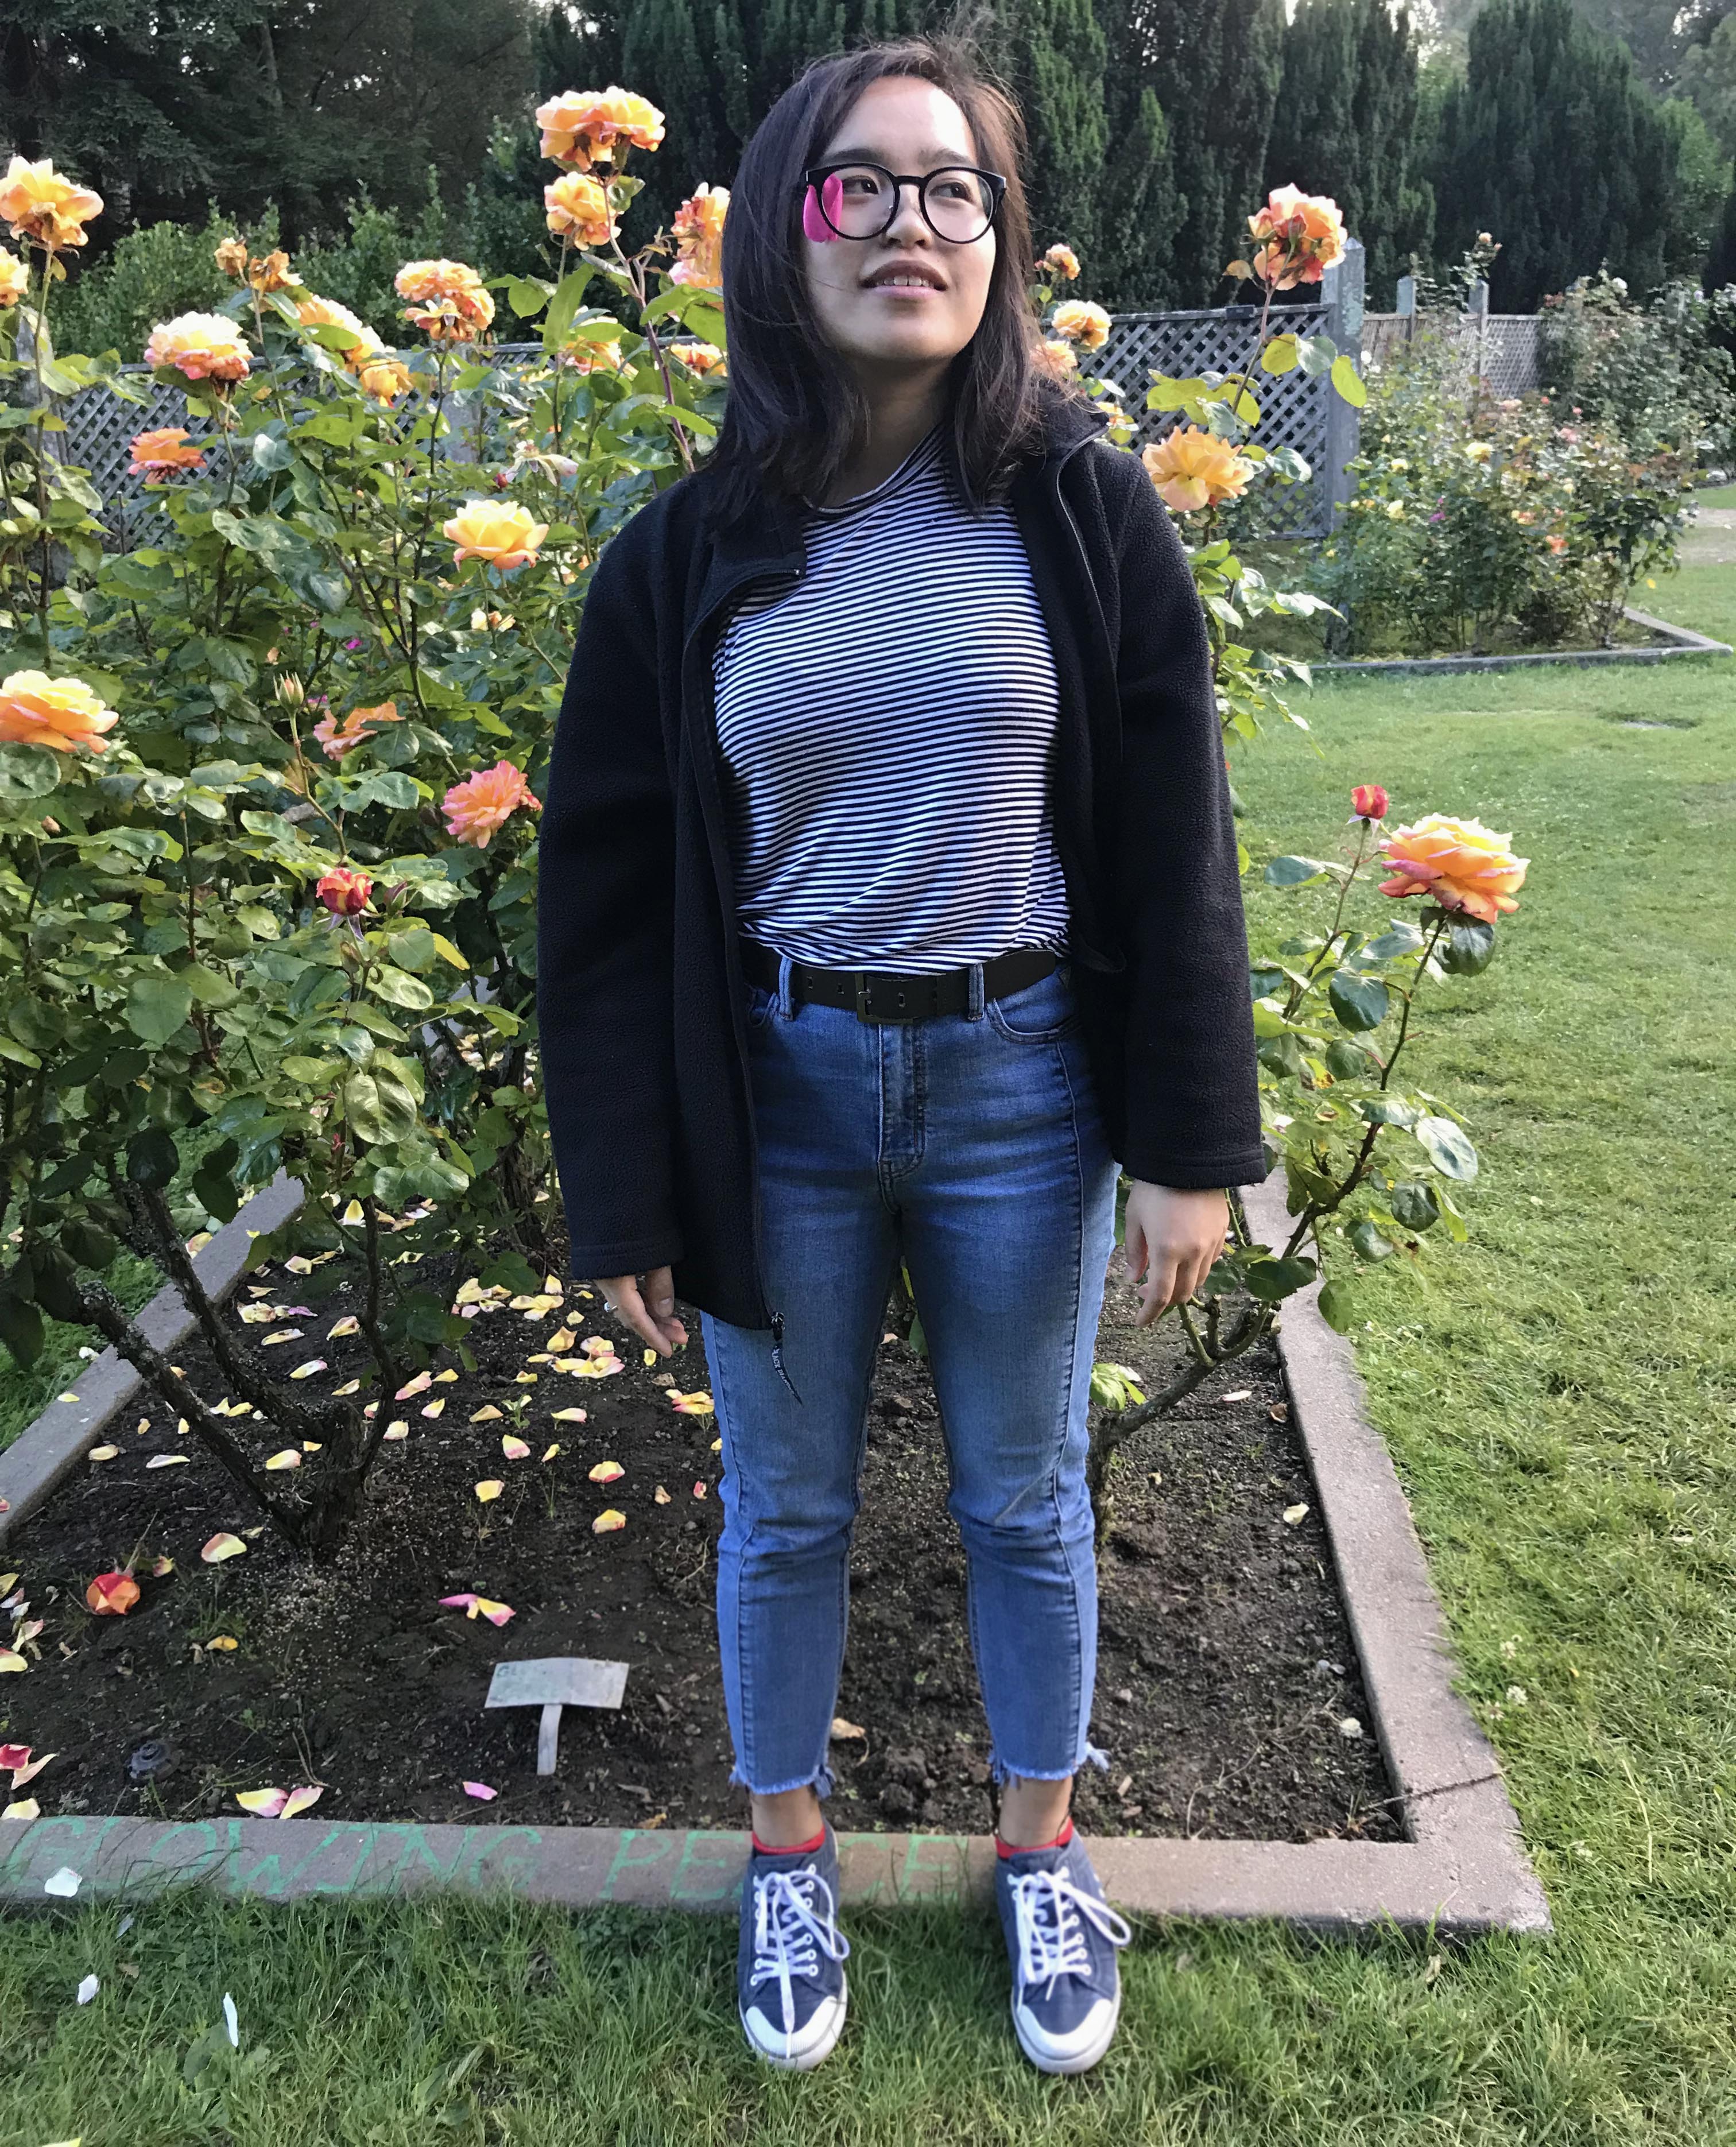 Awkward girl standing in front of roses. A rose petal is stuck in her glasses.